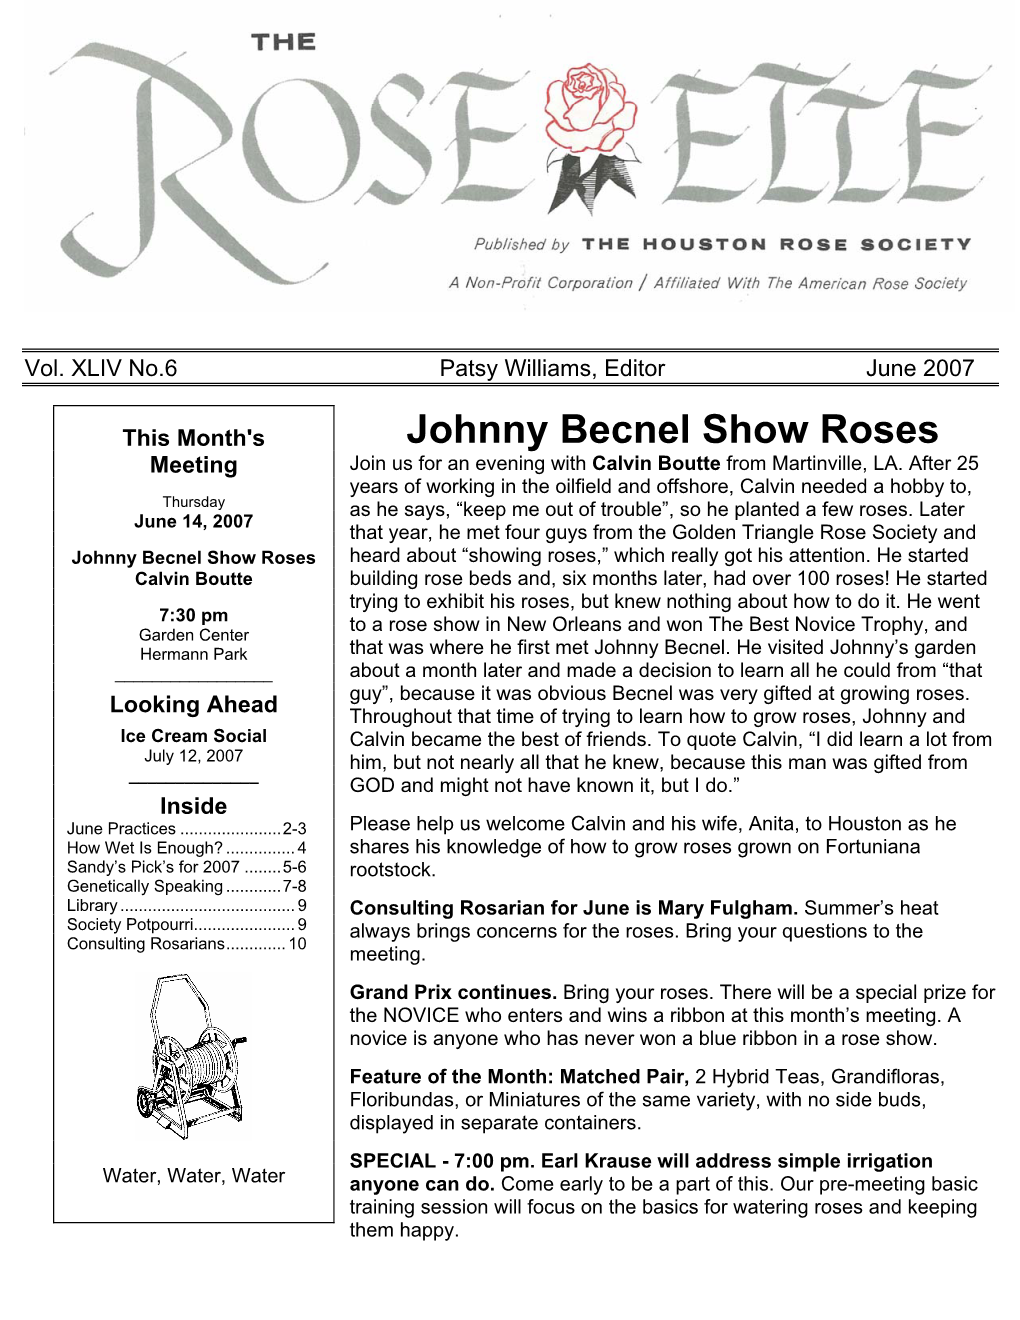 Johnny Becnel Show Roses Meeting Join Us for an Evening with Calvin Boutte from Martinville, LA